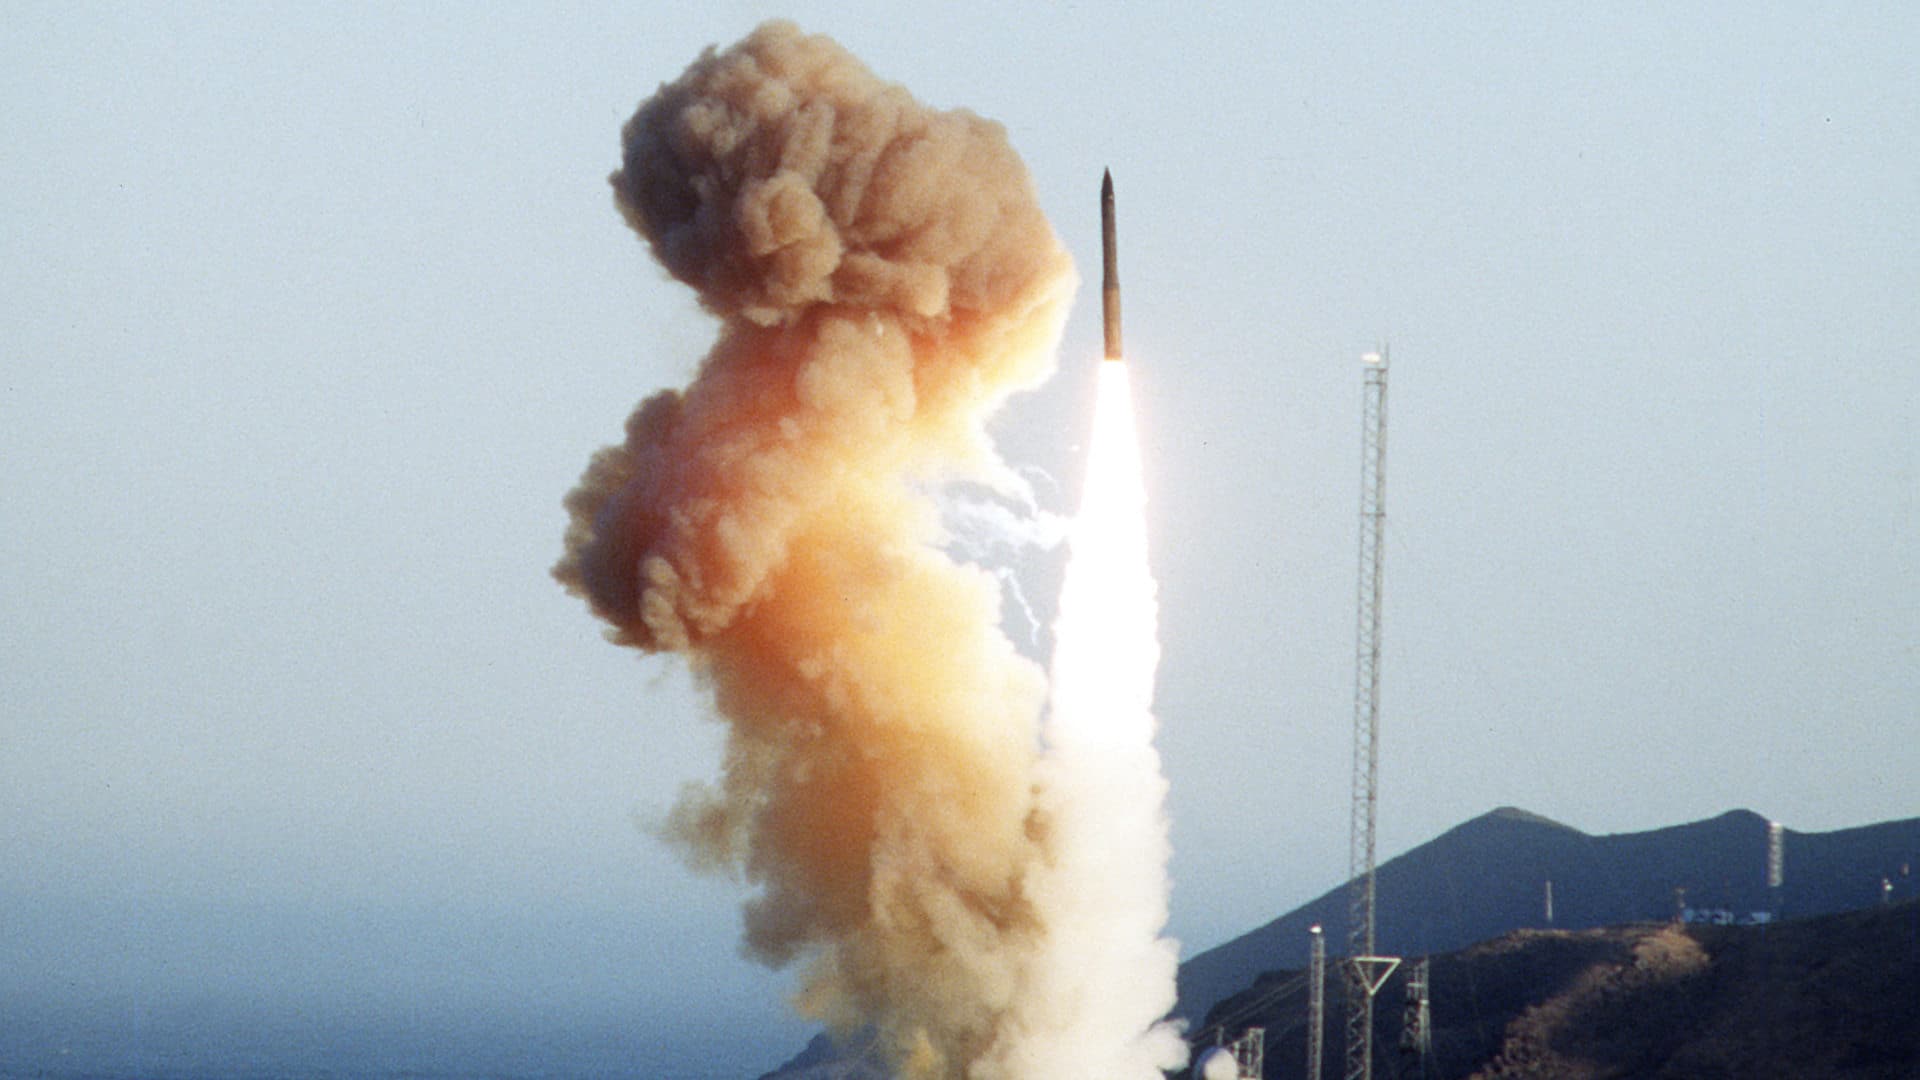 The Minuteman missile was developed during the Cold War as an intercontinental ballistic missile capable of delivering nuclear warheads across vast distances.